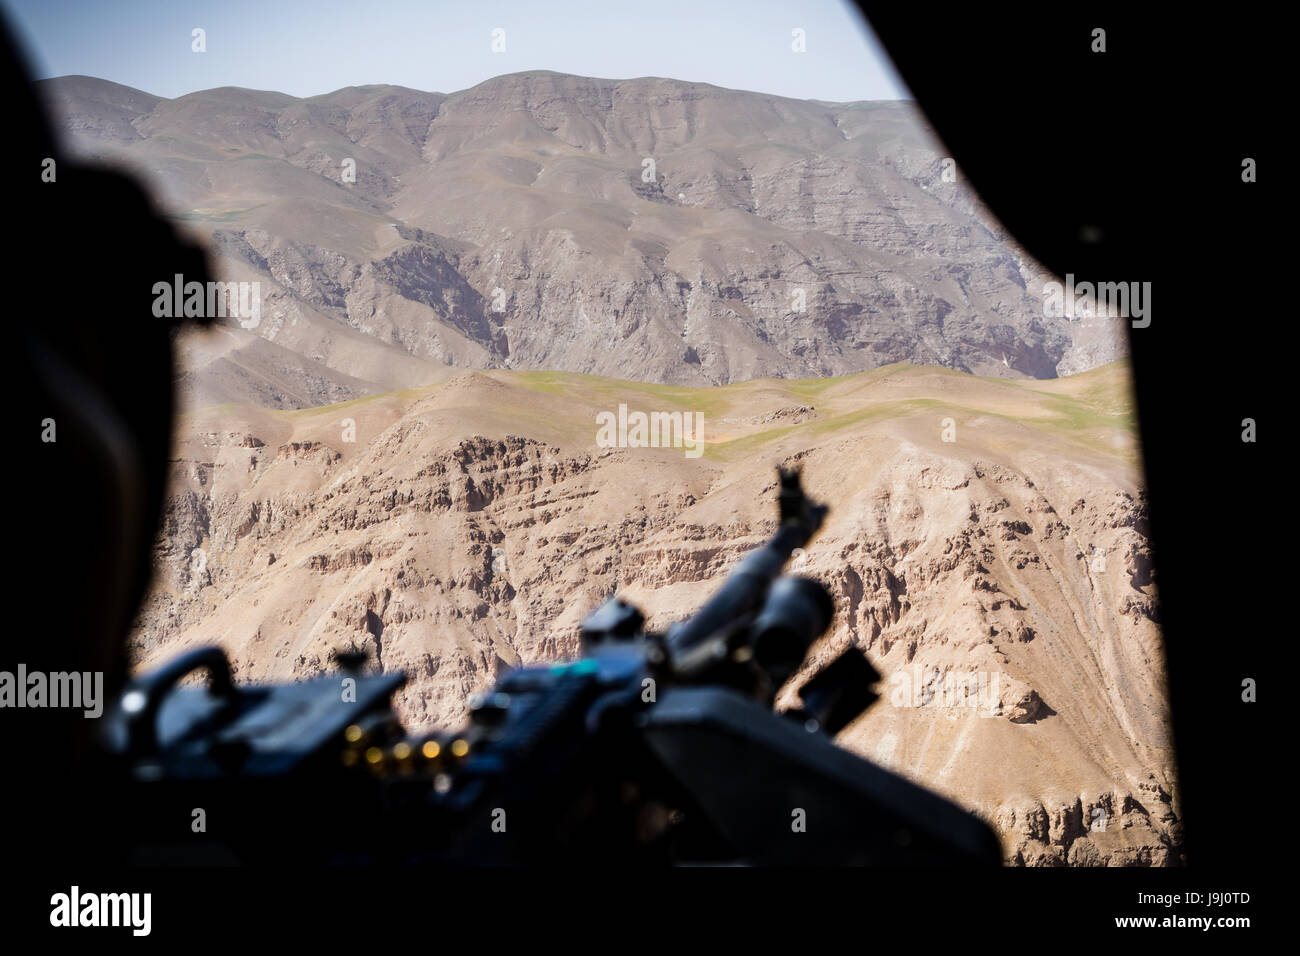 A U.S. Army door gunner watches the hills during a flight in a UH-60 Black Hawk helicopter assigned to Task Force Griffin, 16th Combat Aviation Brigade, reloads weapons and fuel before departing on a mission in support of Operation Resolute Support May 1, 2017 in Kunduz, Afghanistan. Kunduz has seen increased Taliban activity as more than 8,000 American troops and 6,000 from NATO and allied countries continue to assist the government. Stock Photo